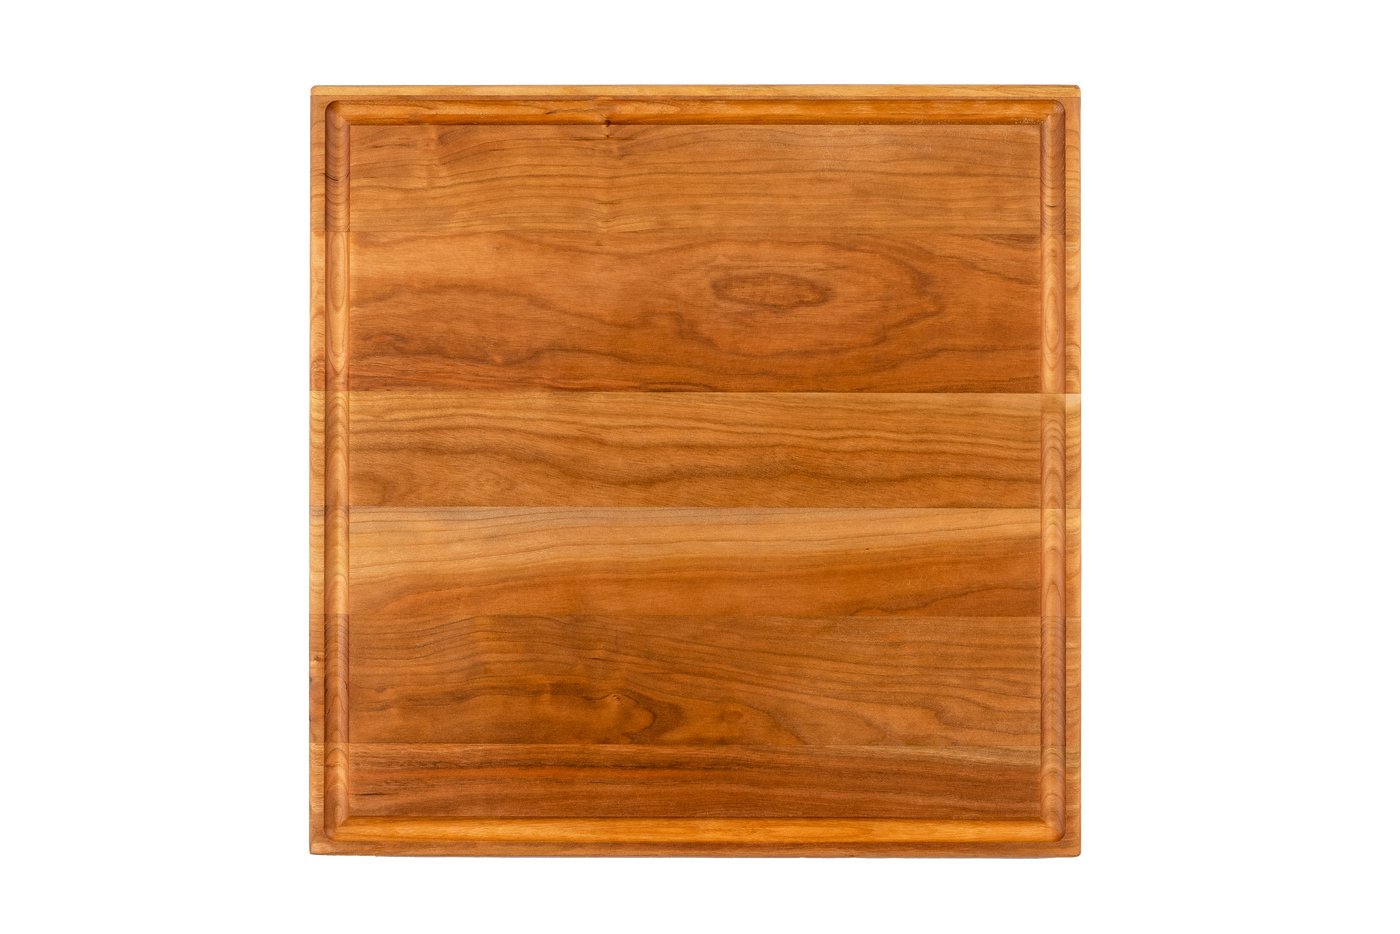 Cherry - CSQG14 - Square Cutting Board with Juice Groove 14-1/4''x14-1/4''x3/4''